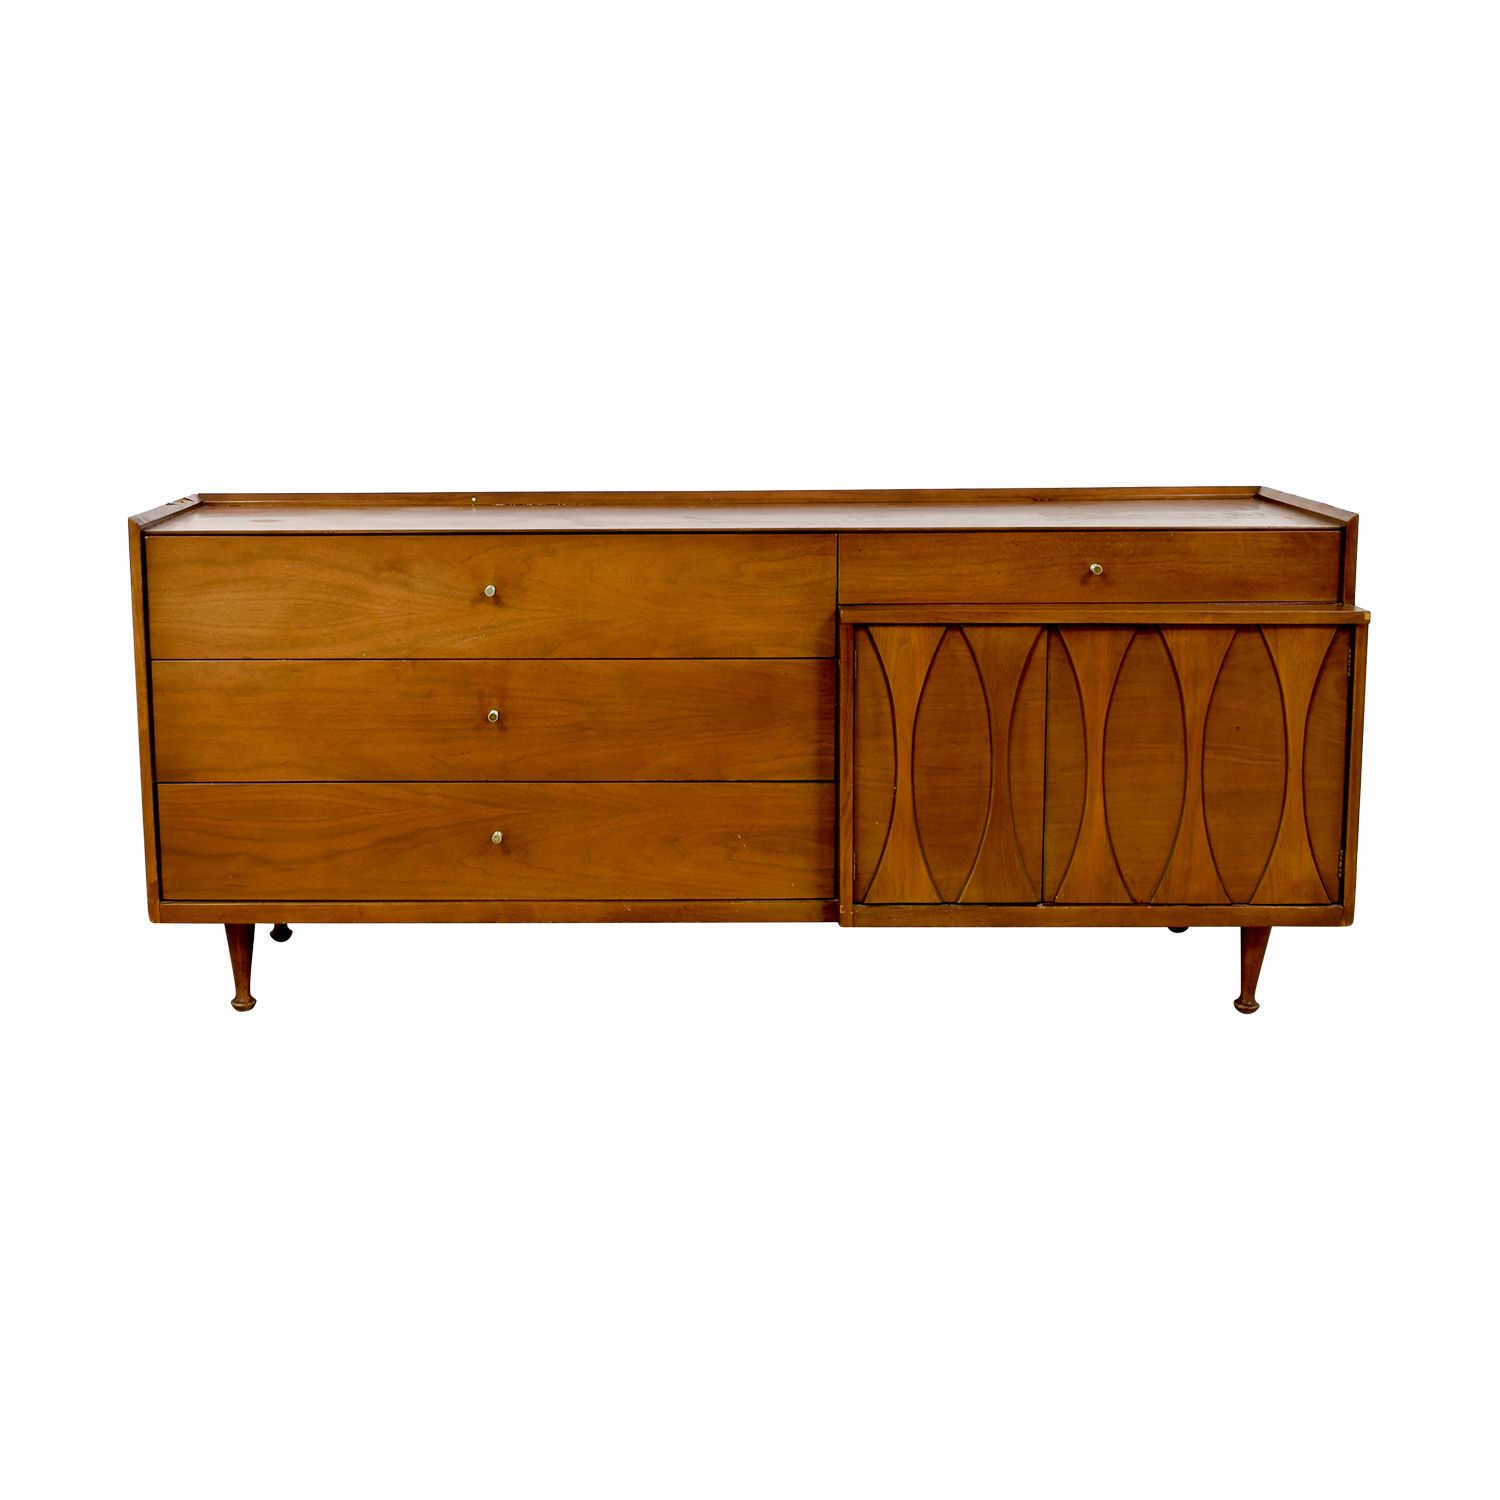 88% Off – Mid Century Modern Credenza / Storage Intended For Mid Century Brown Sideboards (View 12 of 20)